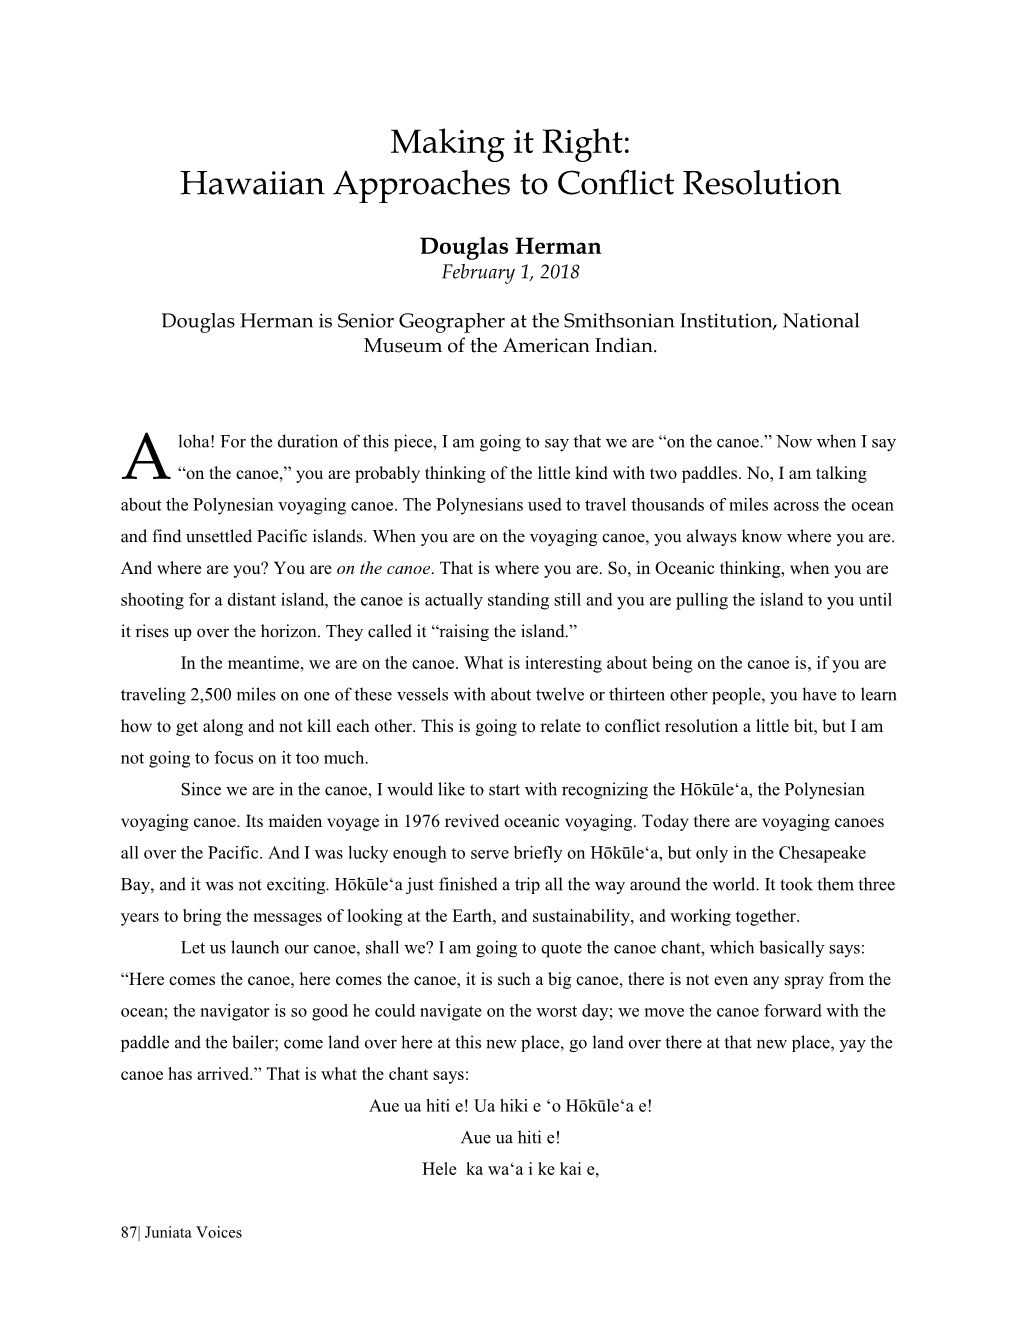 Making It Right: Hawaiian Approaches to Conflict Resolution